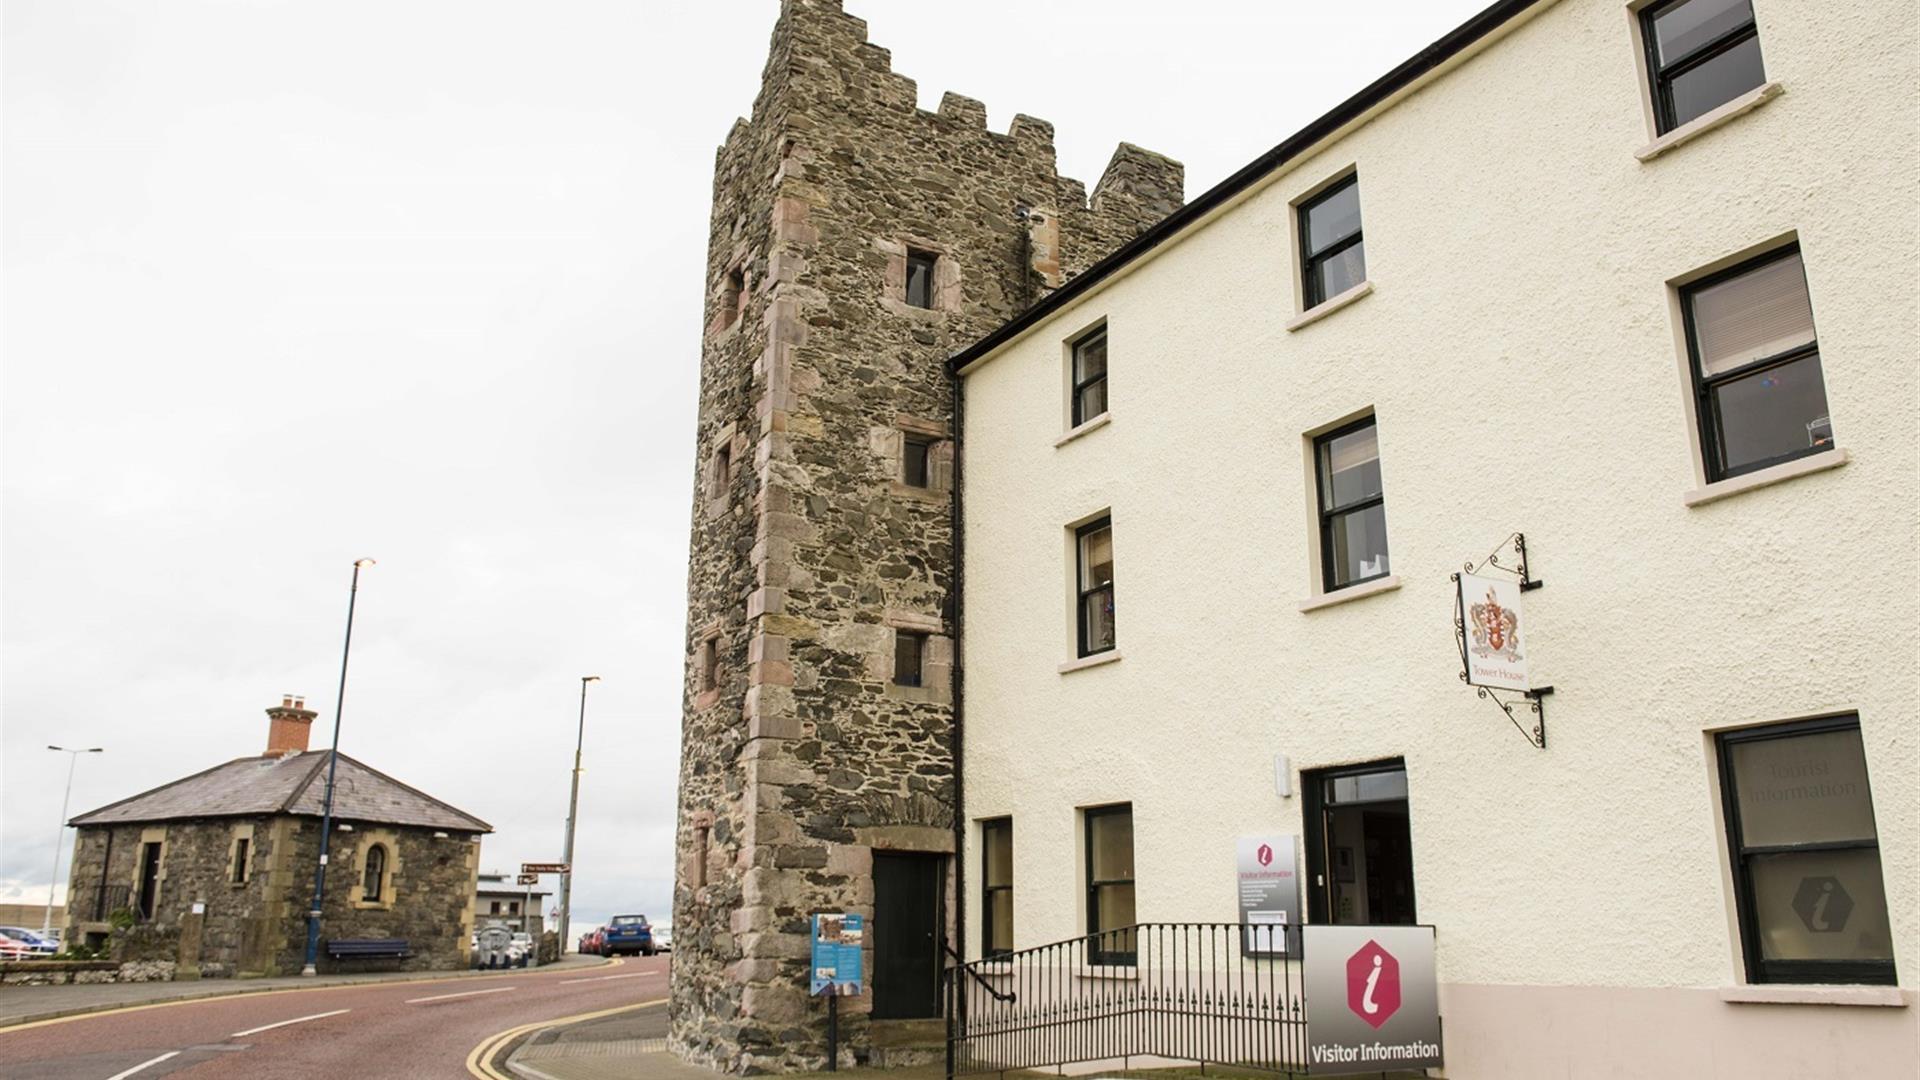 A photo of the 17th century old Tower House which houses Bangor Visitor Information Centre and offices of Ards and North Down Borough Council